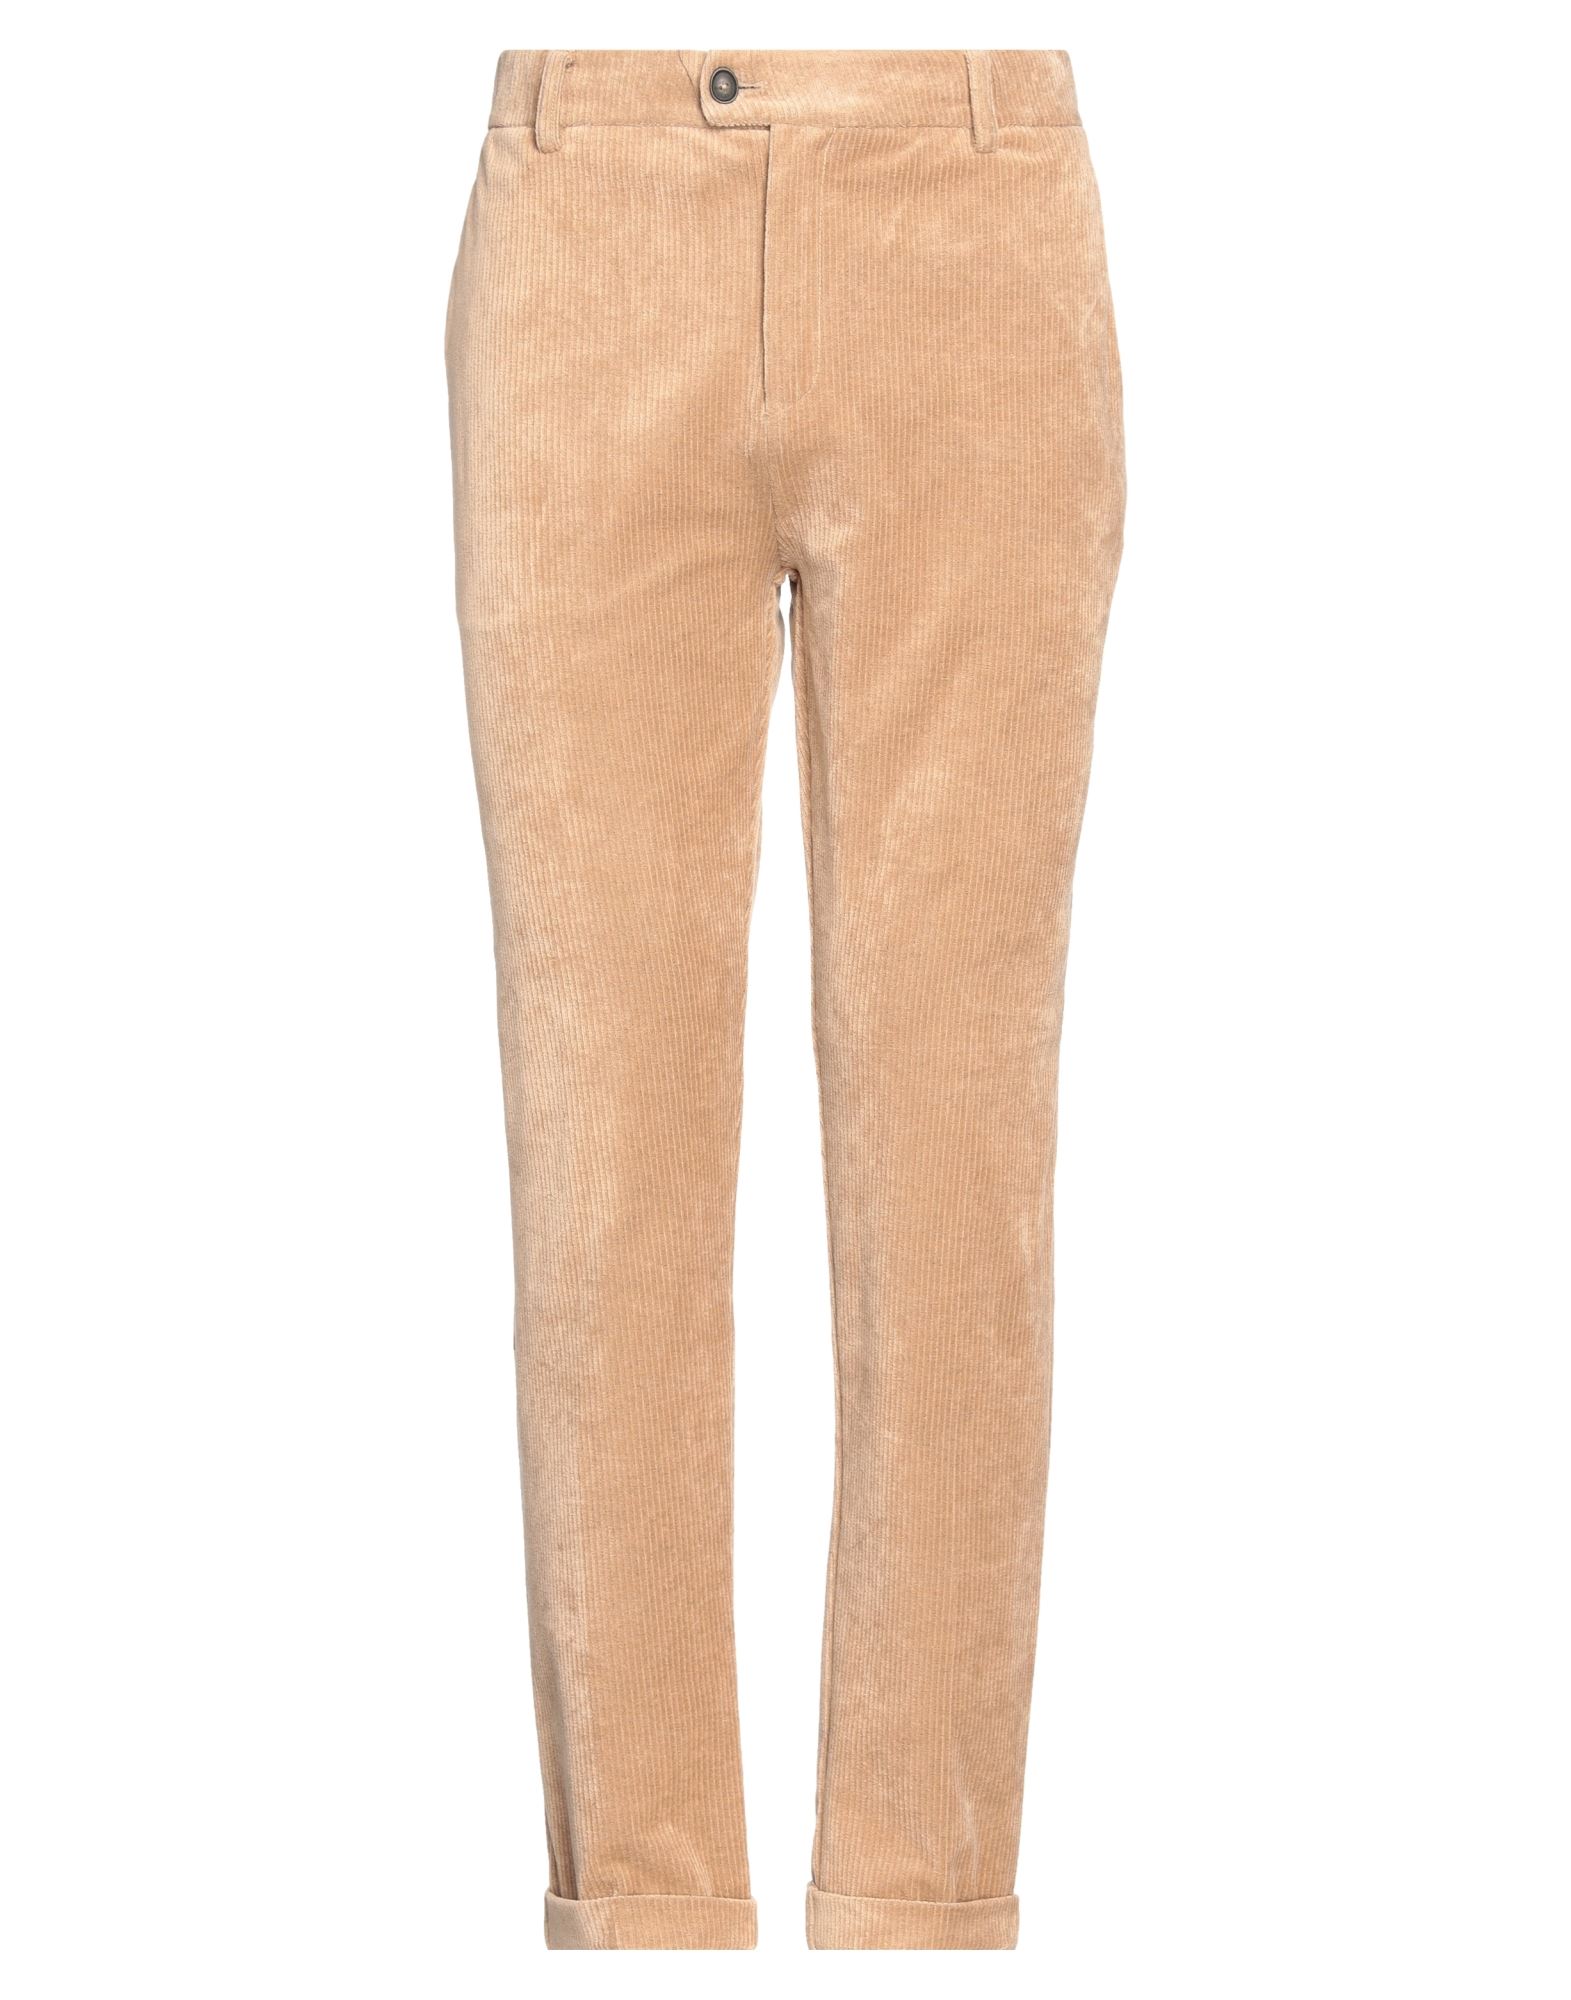 Distretto 12 Pants In Beige